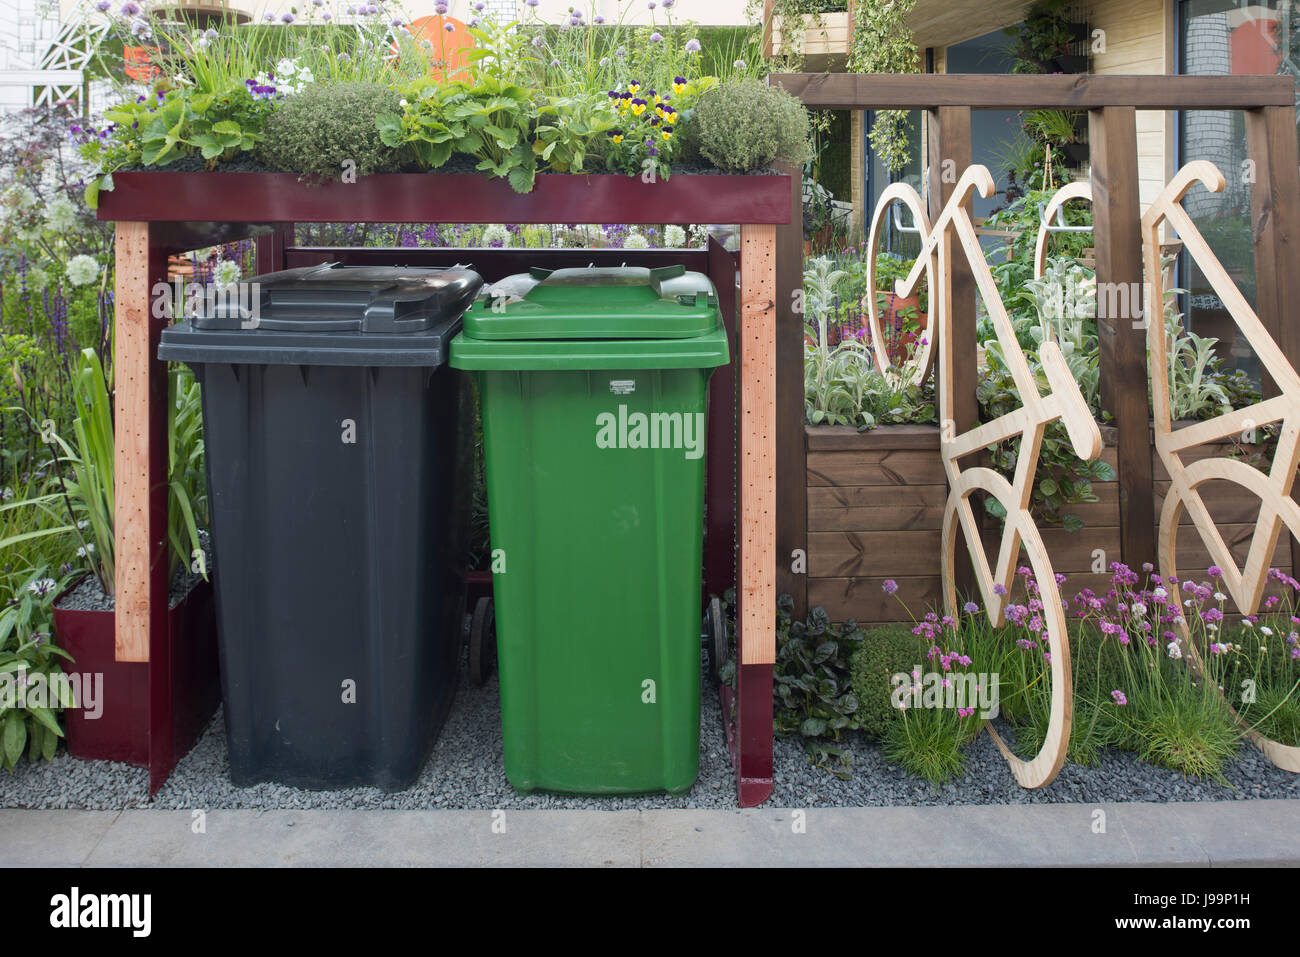 A container for wheelie bins topped with plants in the RHS Greening of Grey Britain Garden at the RHS Chelsea Flower Show 2017, London, UK Stock Photo